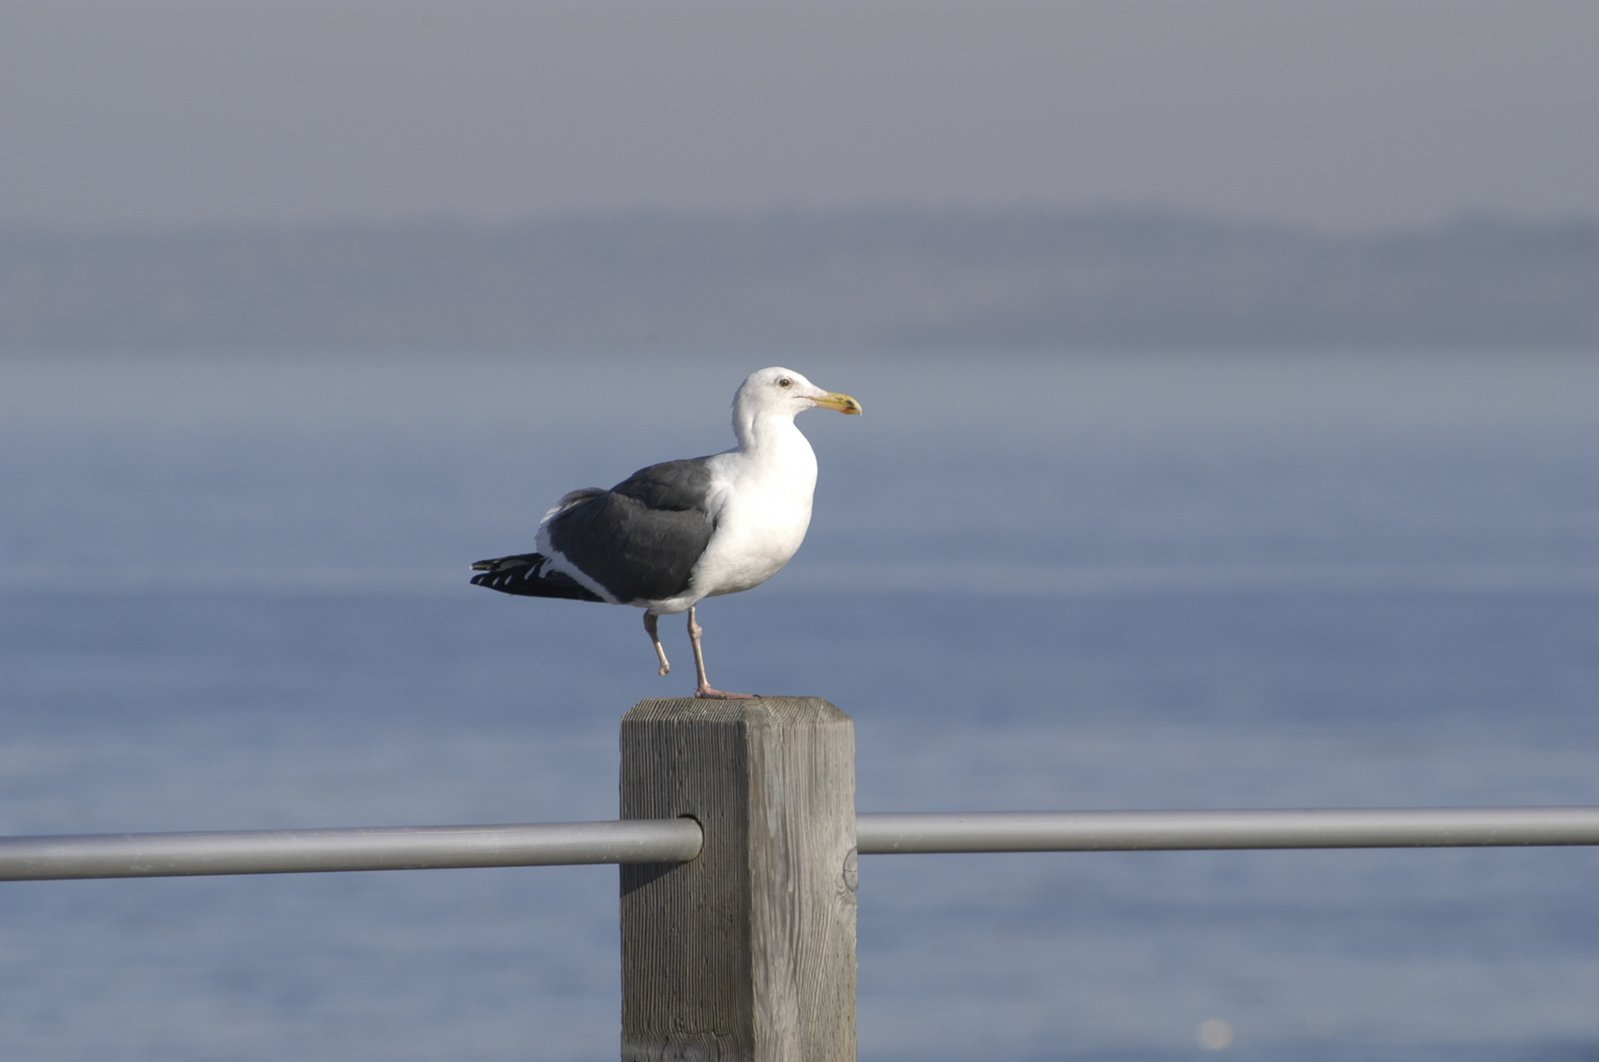 a white and gray bird standing on top of a wooden post